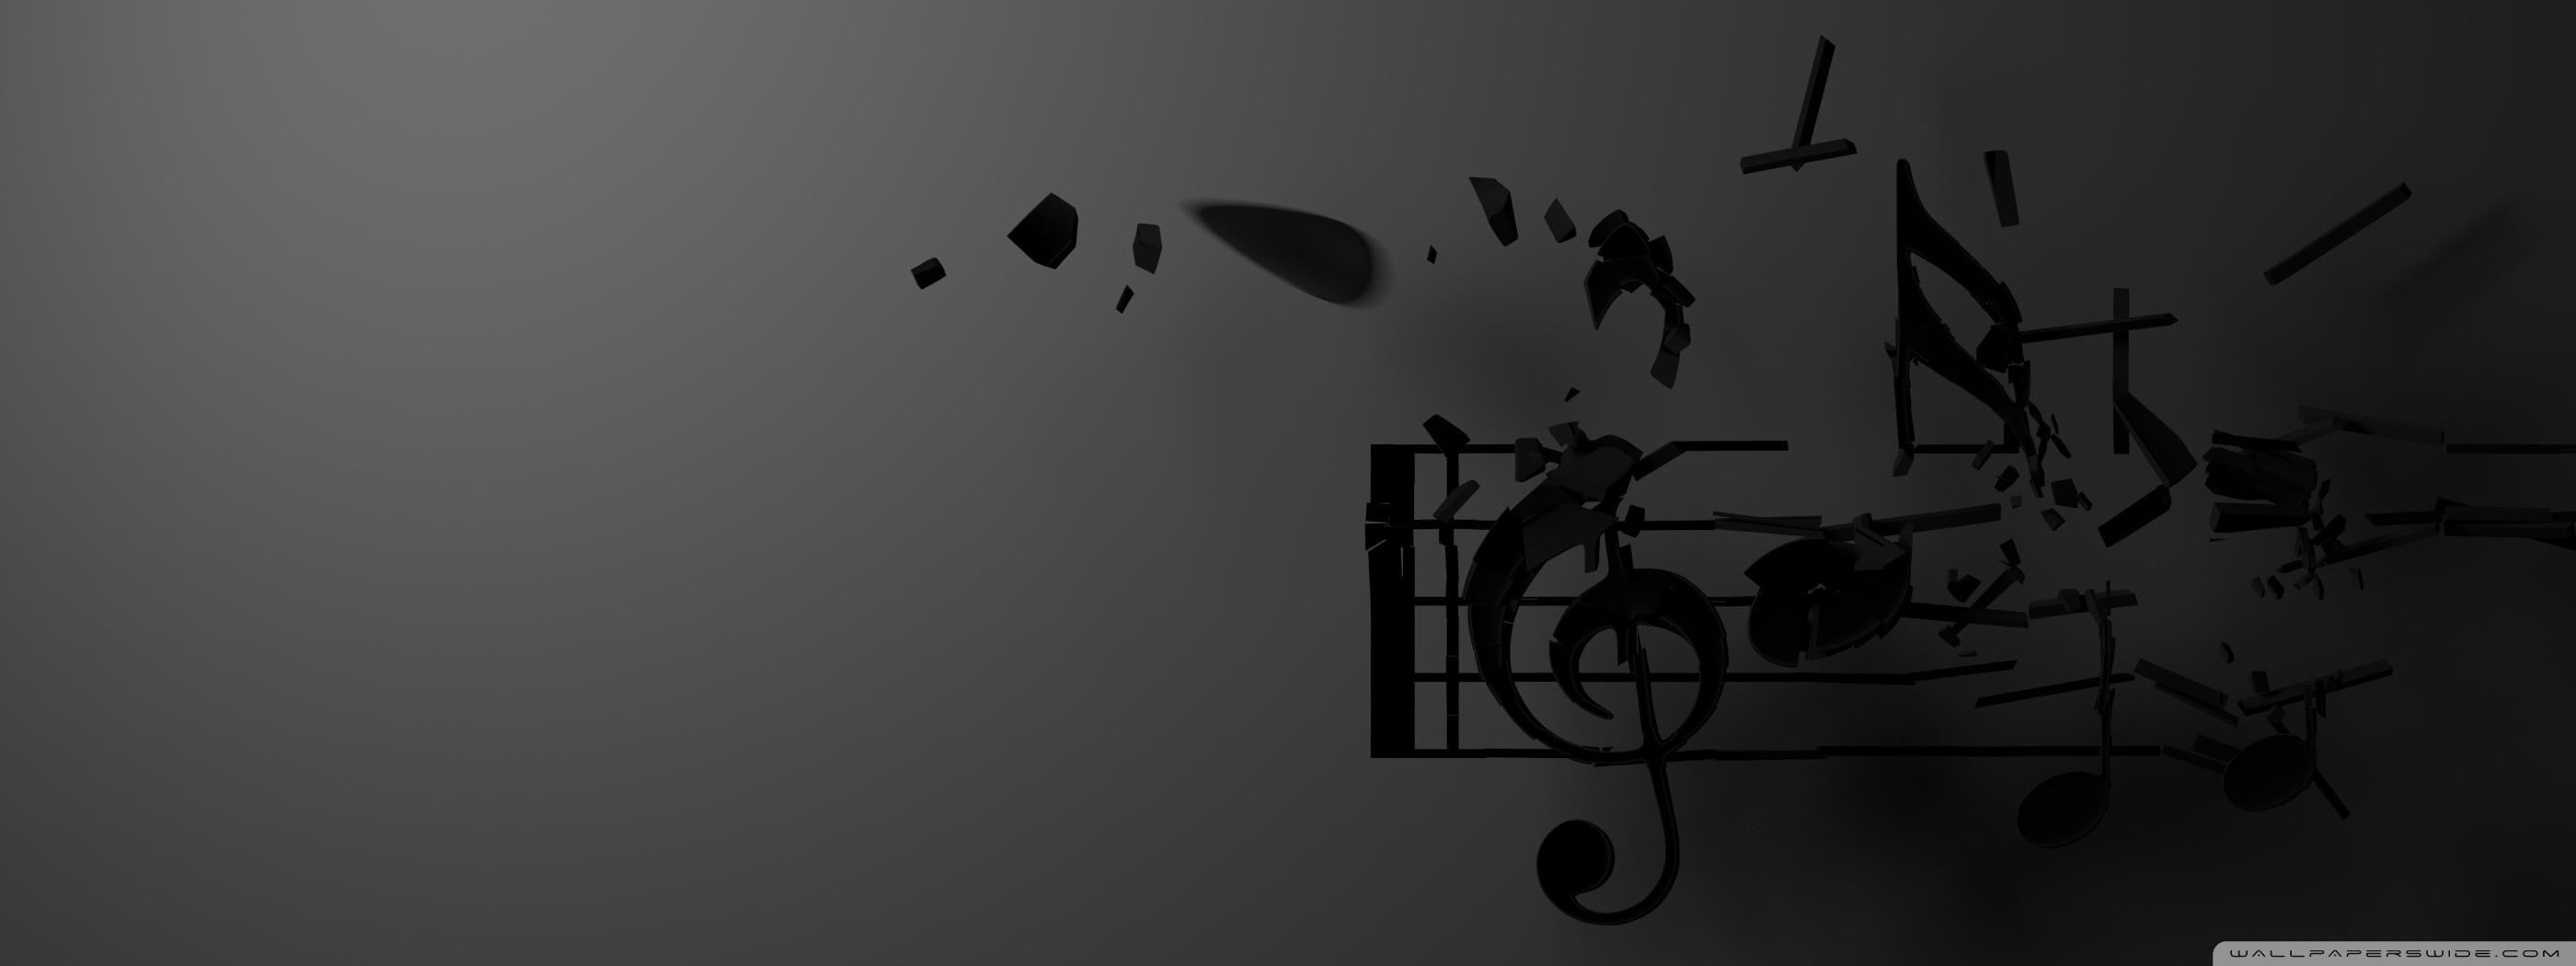 Music wallpapers for desktop download free Music pictures and backgrounds  for PC  moborg